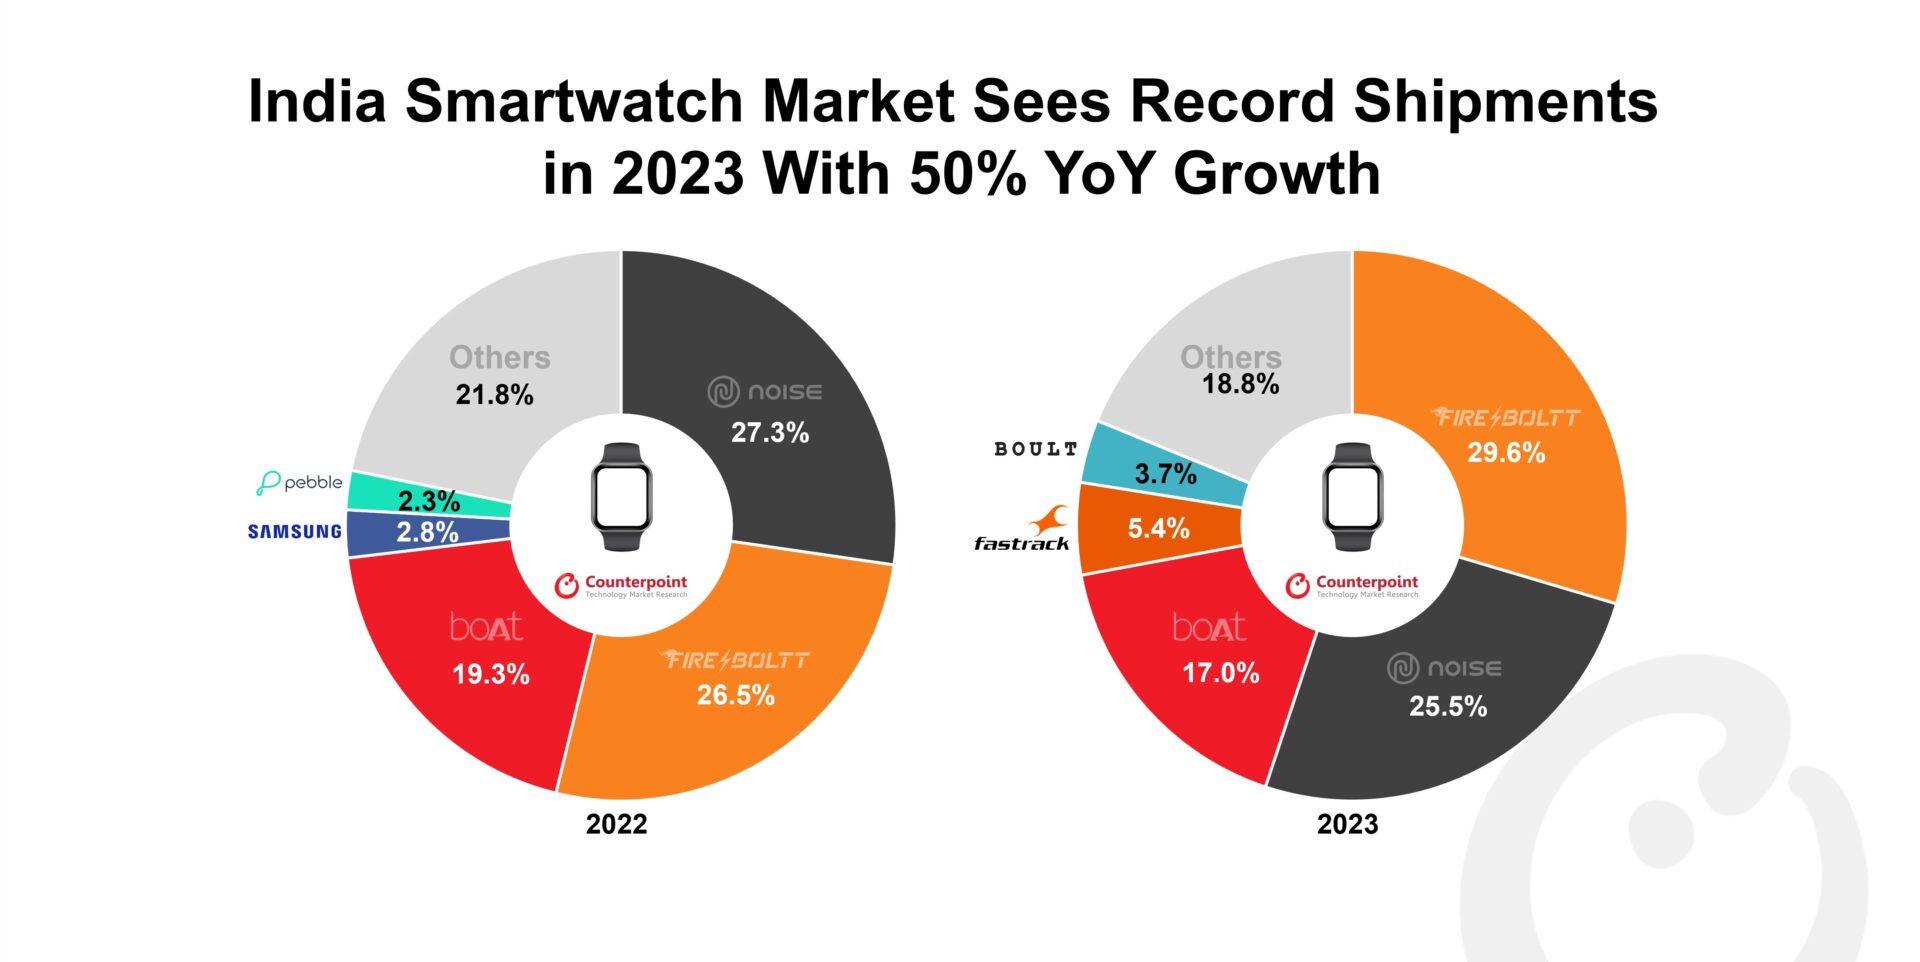 India Smartwatch Market Sees Record Shipments in 2023 With 50% YoY Growth